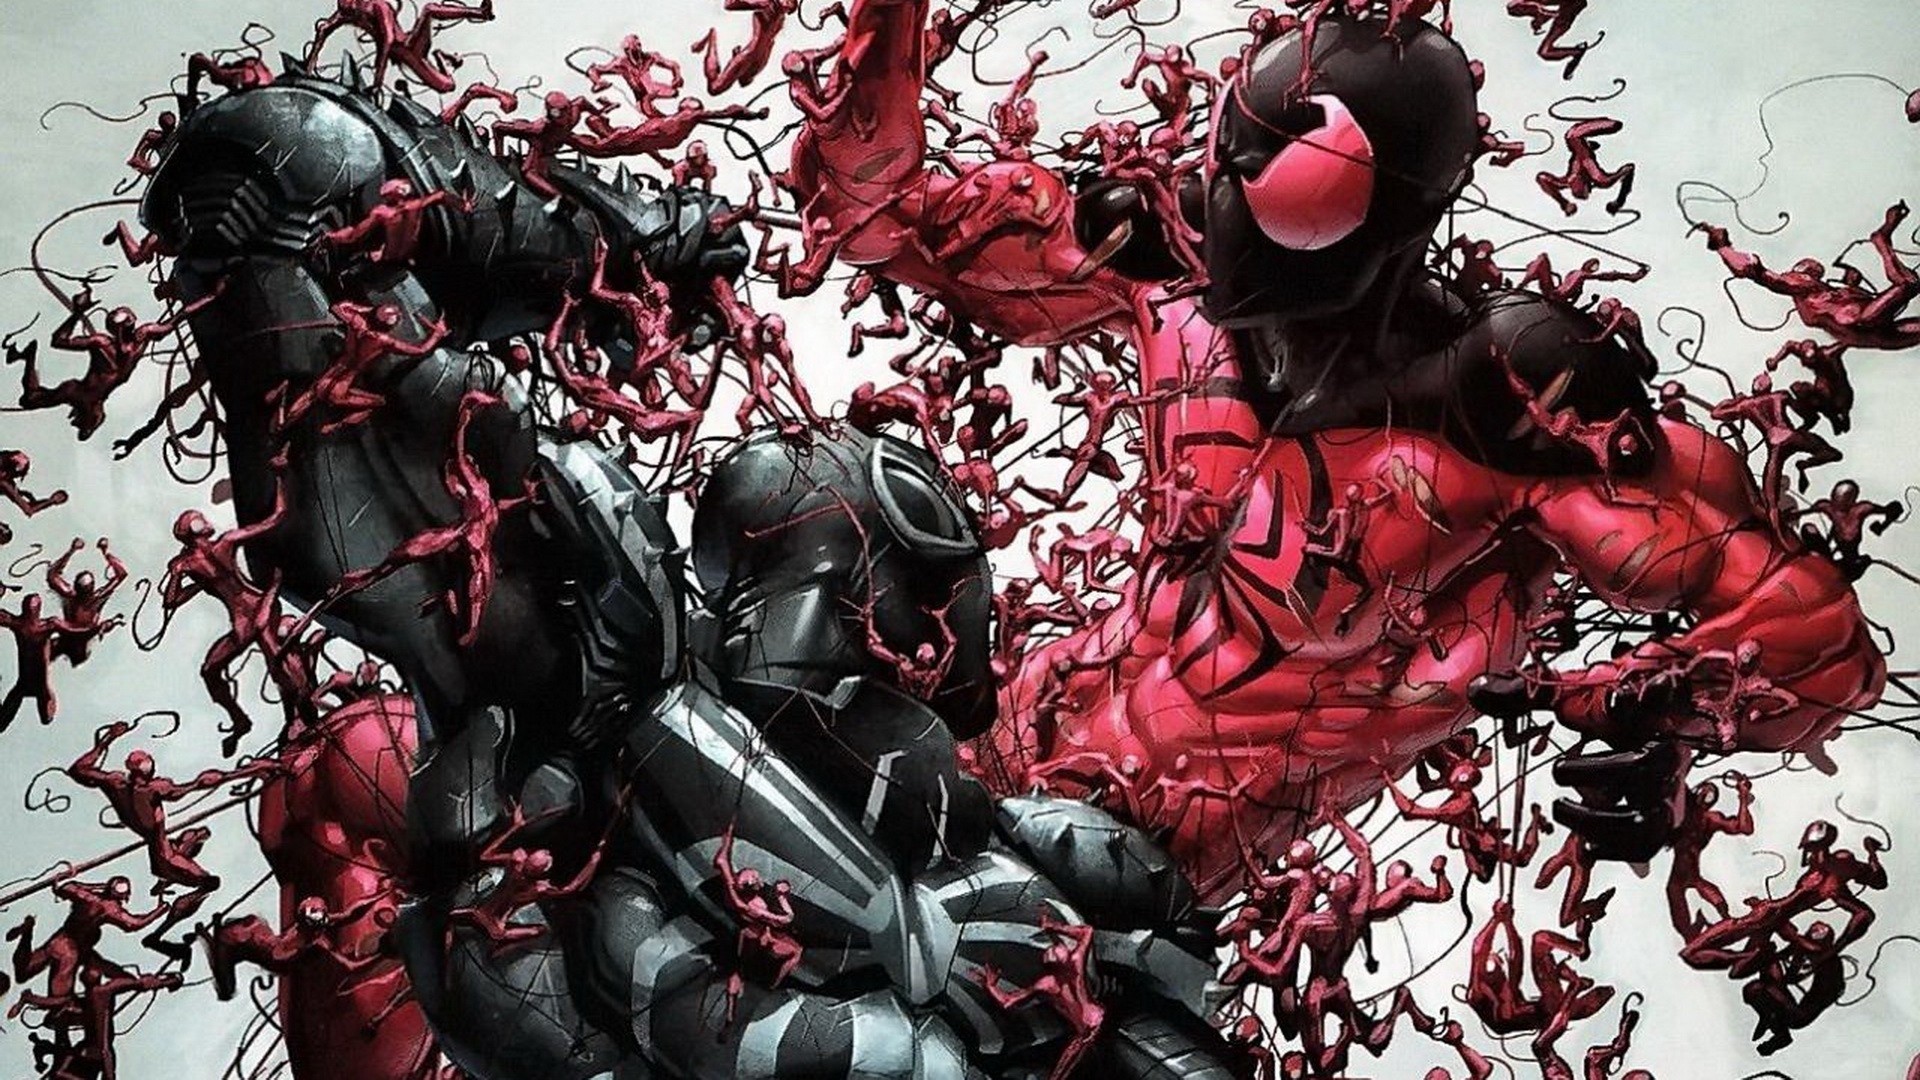 1920x1080 Carnage Wallpaper - Wallpapers Browse